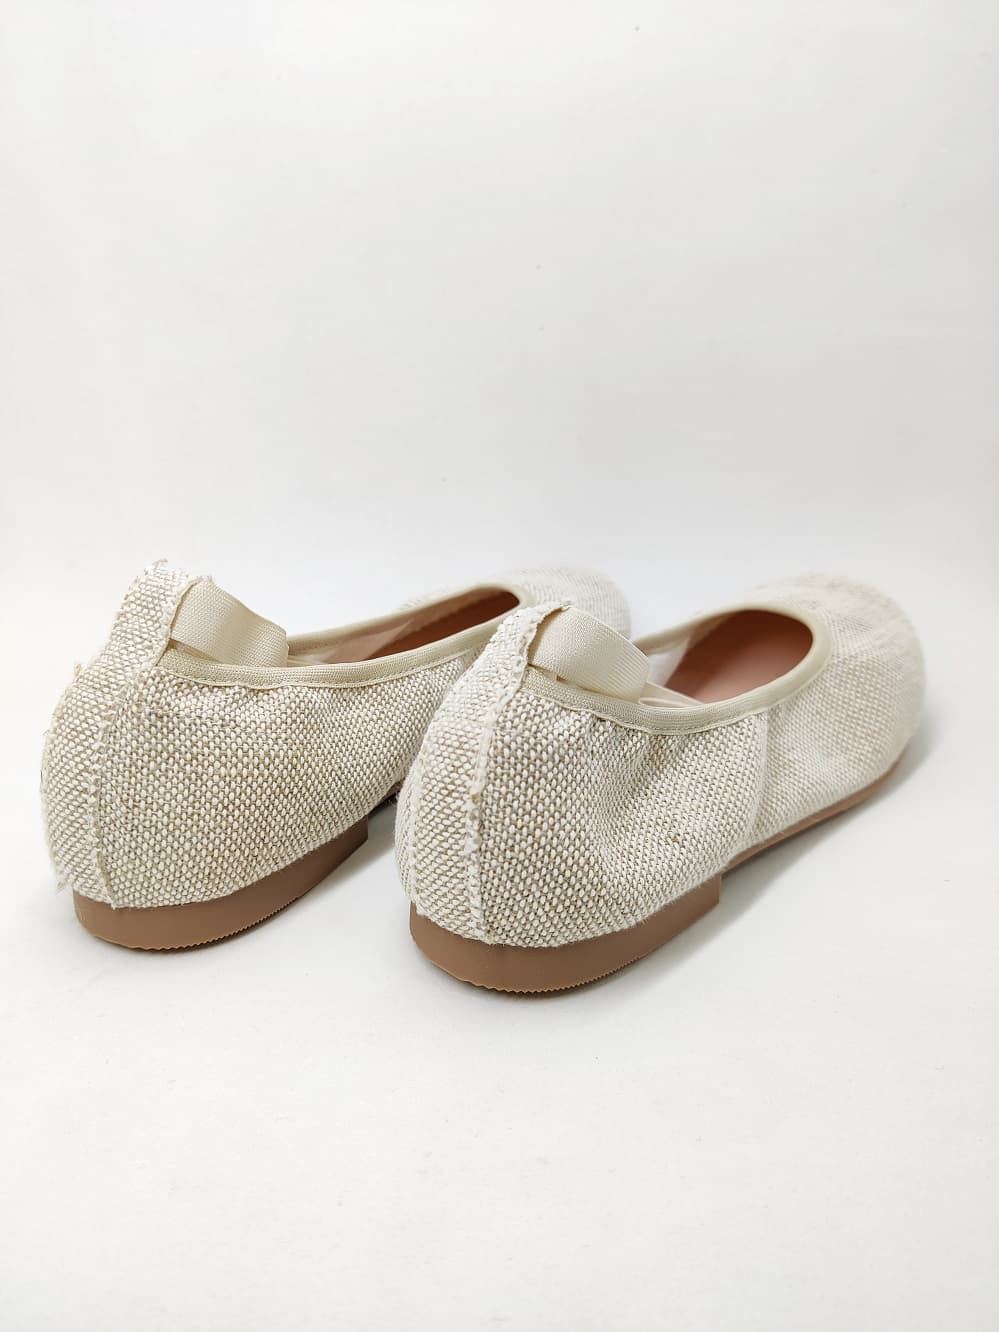 Ruth Secret Ballerinas in Rustic Linen with ribbons - Image 5